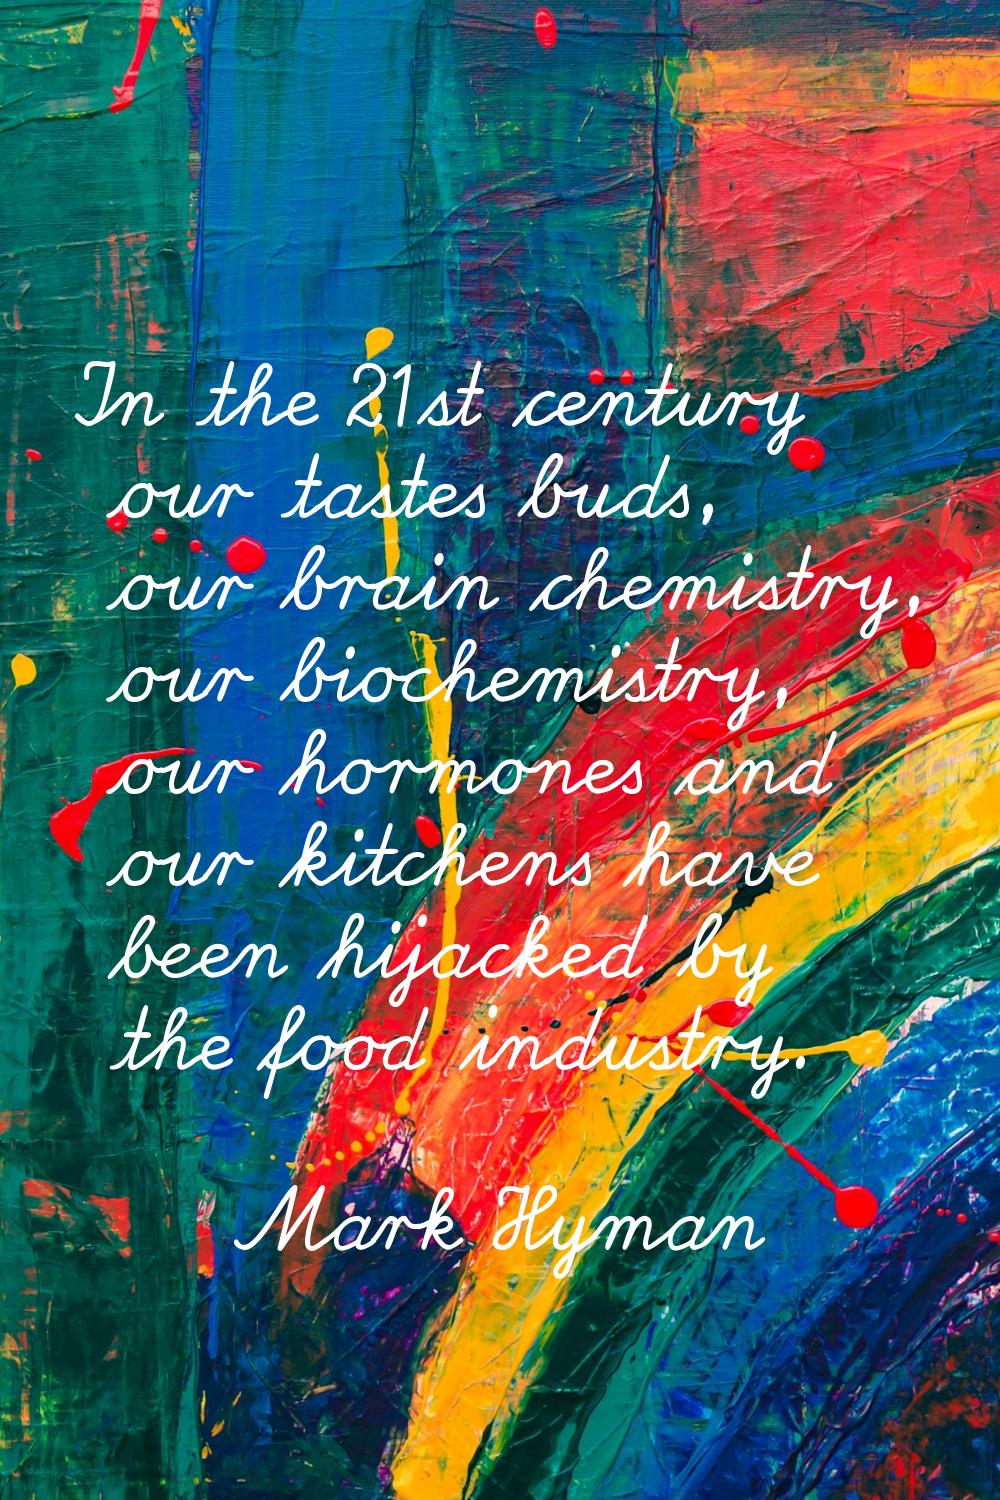 In the 21st century our tastes buds, our brain chemistry, our biochemistry, our hormones and our ki